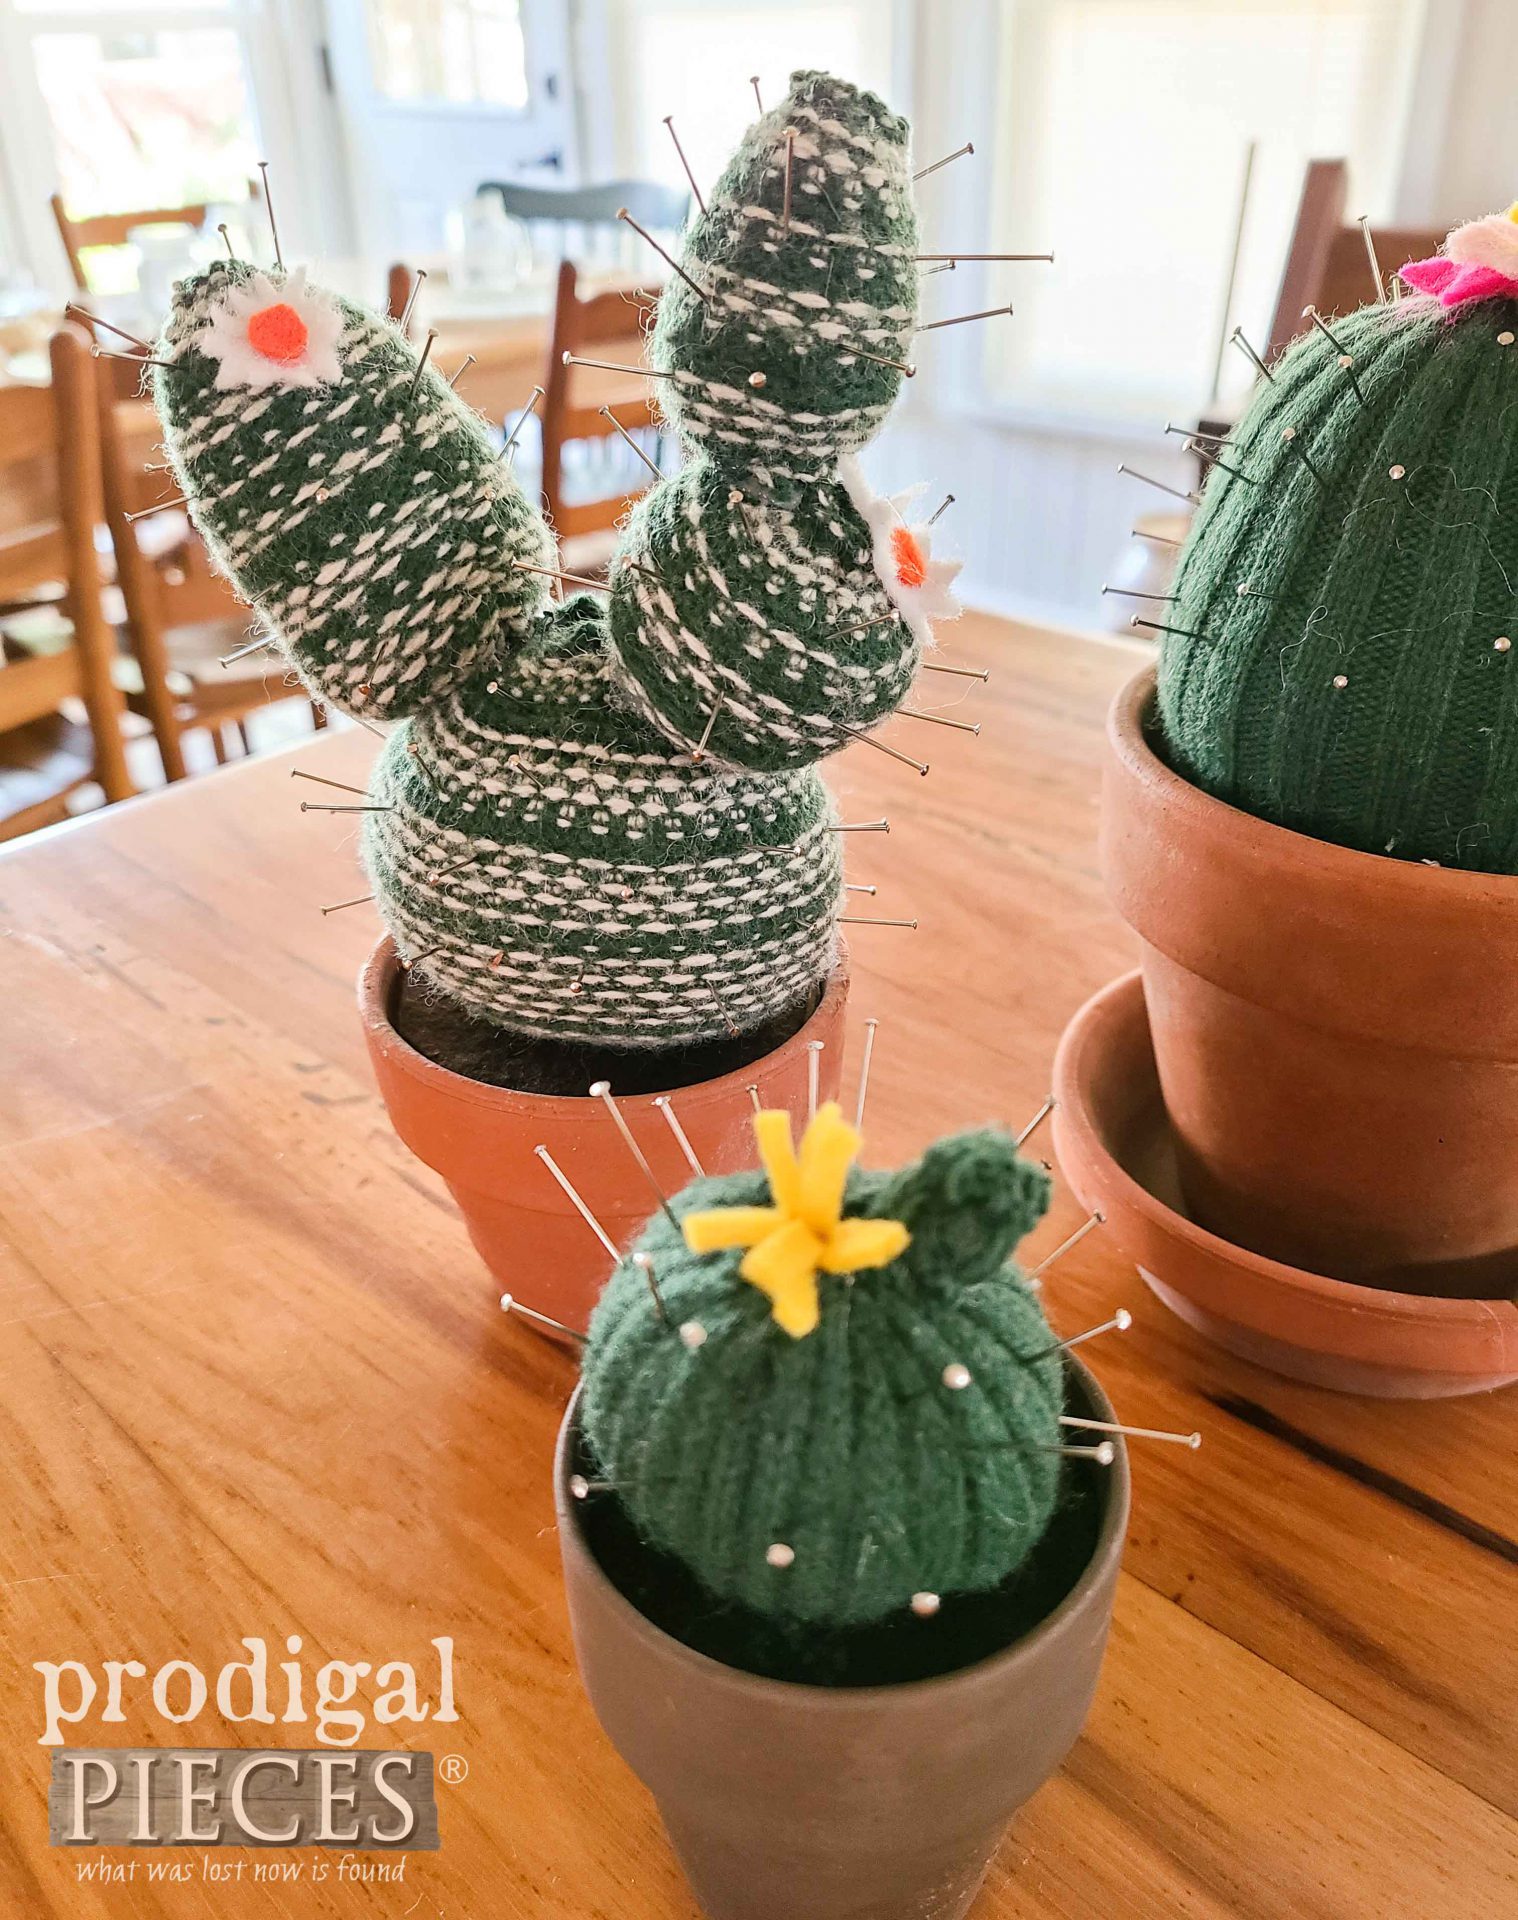 Handmdade Knit Cactus Pincushion from Upcycled Sweater by Larissa of Prodigal Pieces | prodigalpieces.com #prodigalpieces #upcycled #refashion #succulent